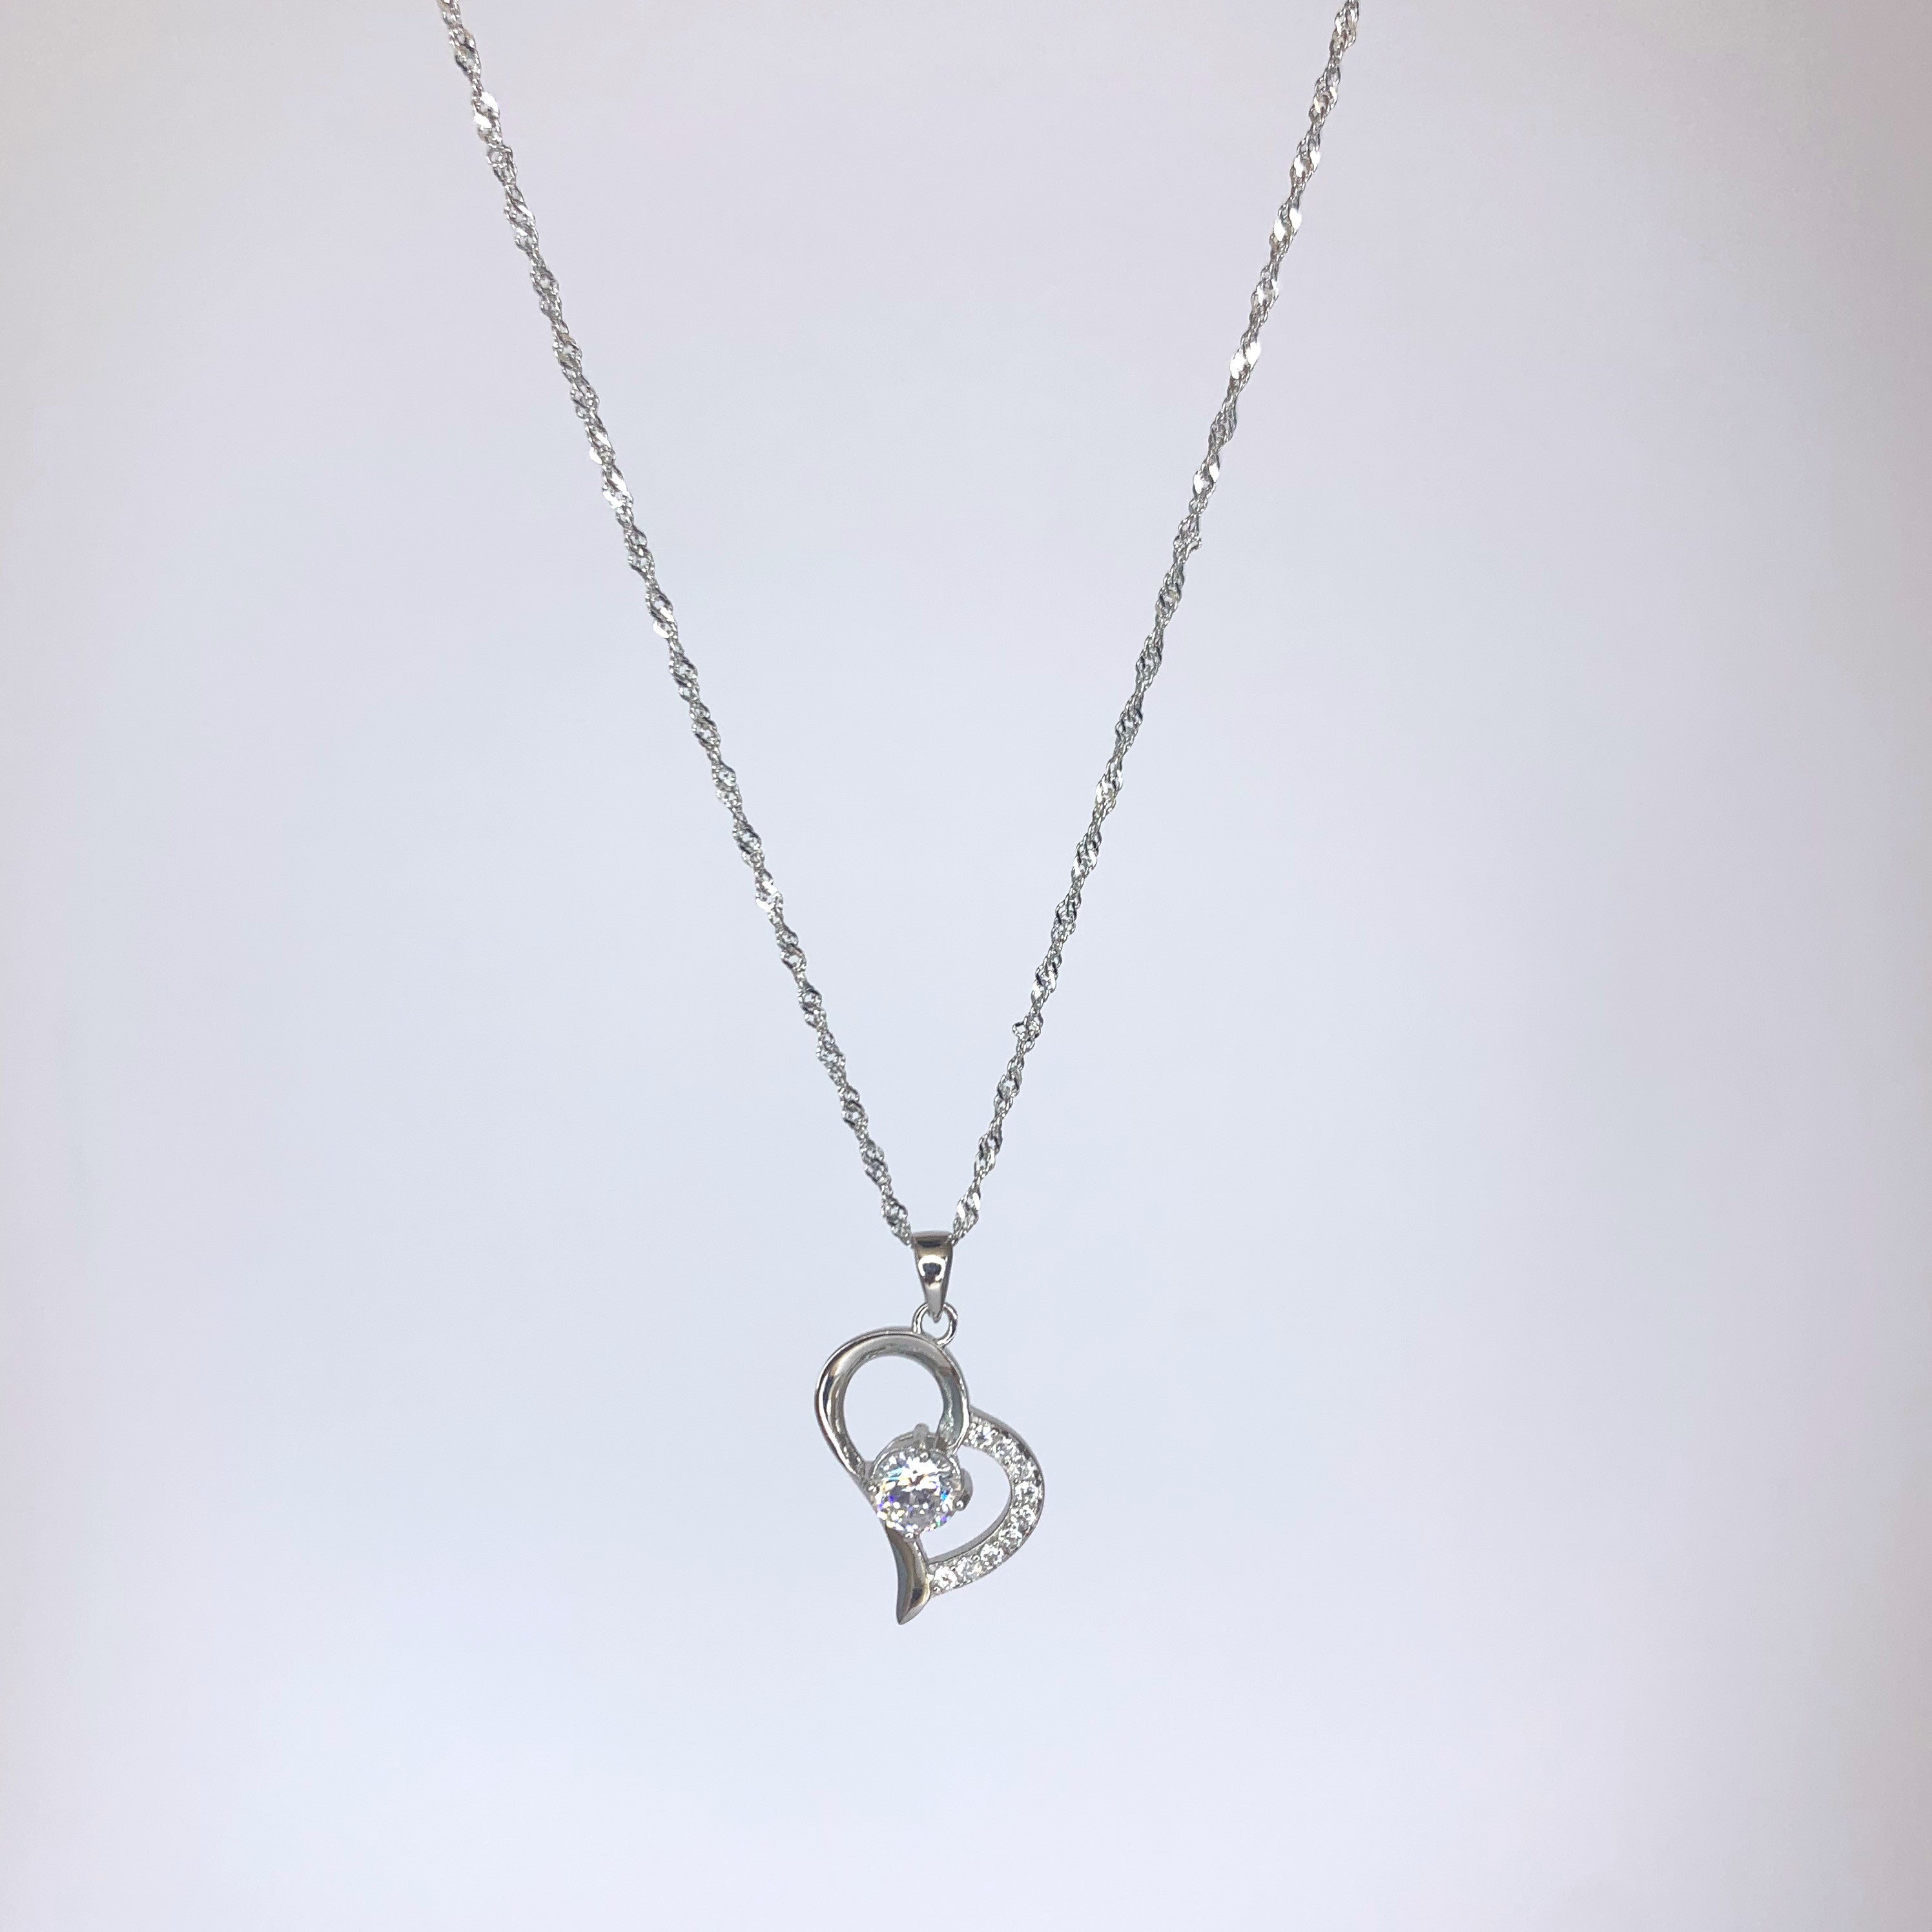 Amour Heart Necklace with Cubic Zirconia Detail Product Shot